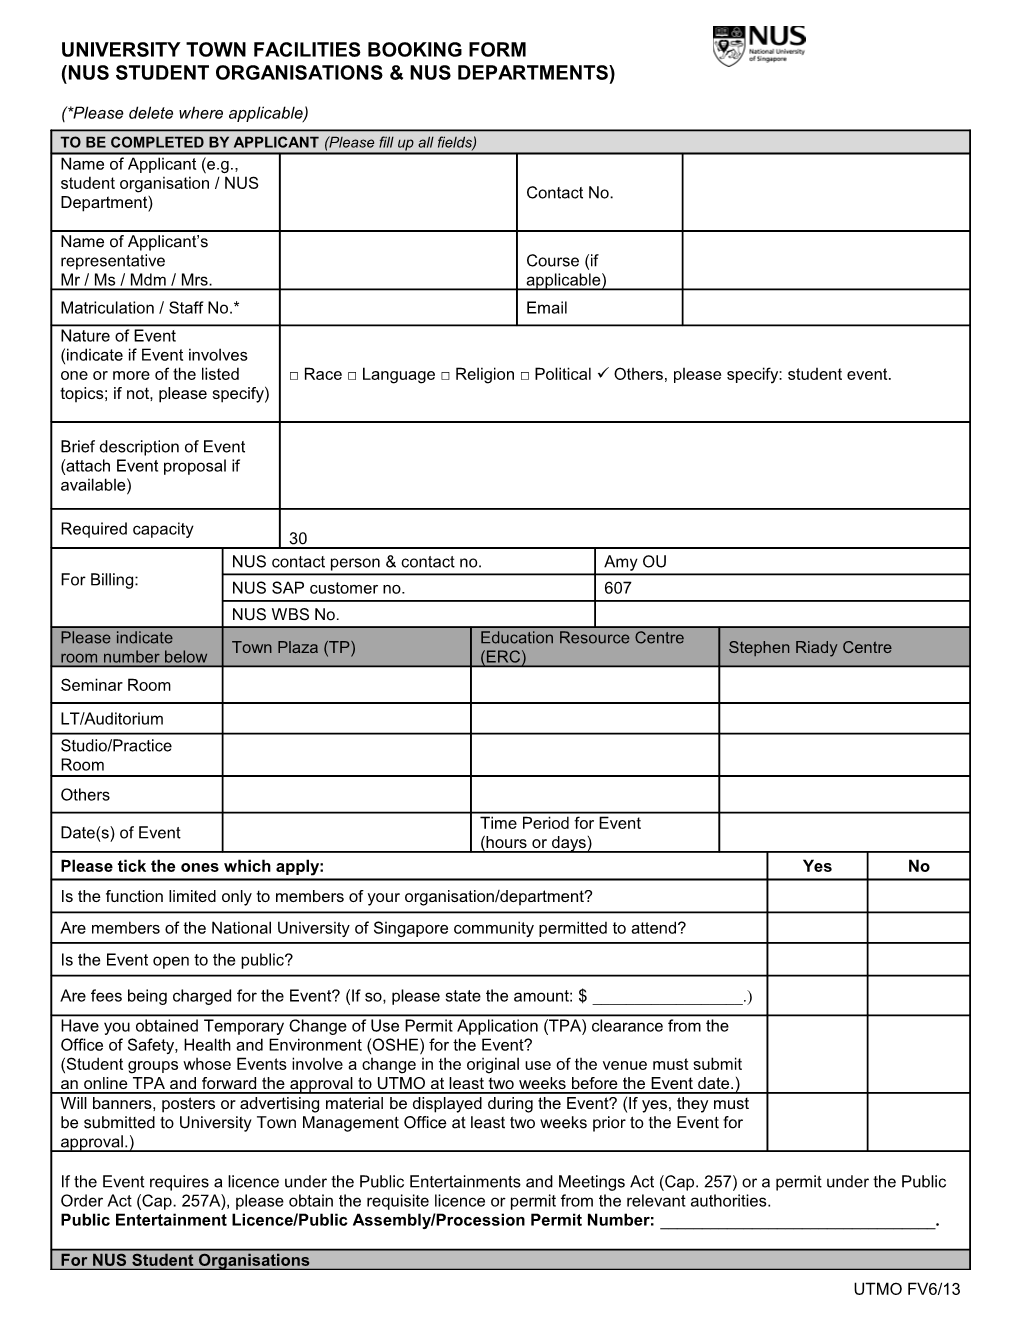 University Town Facilities Booking Form